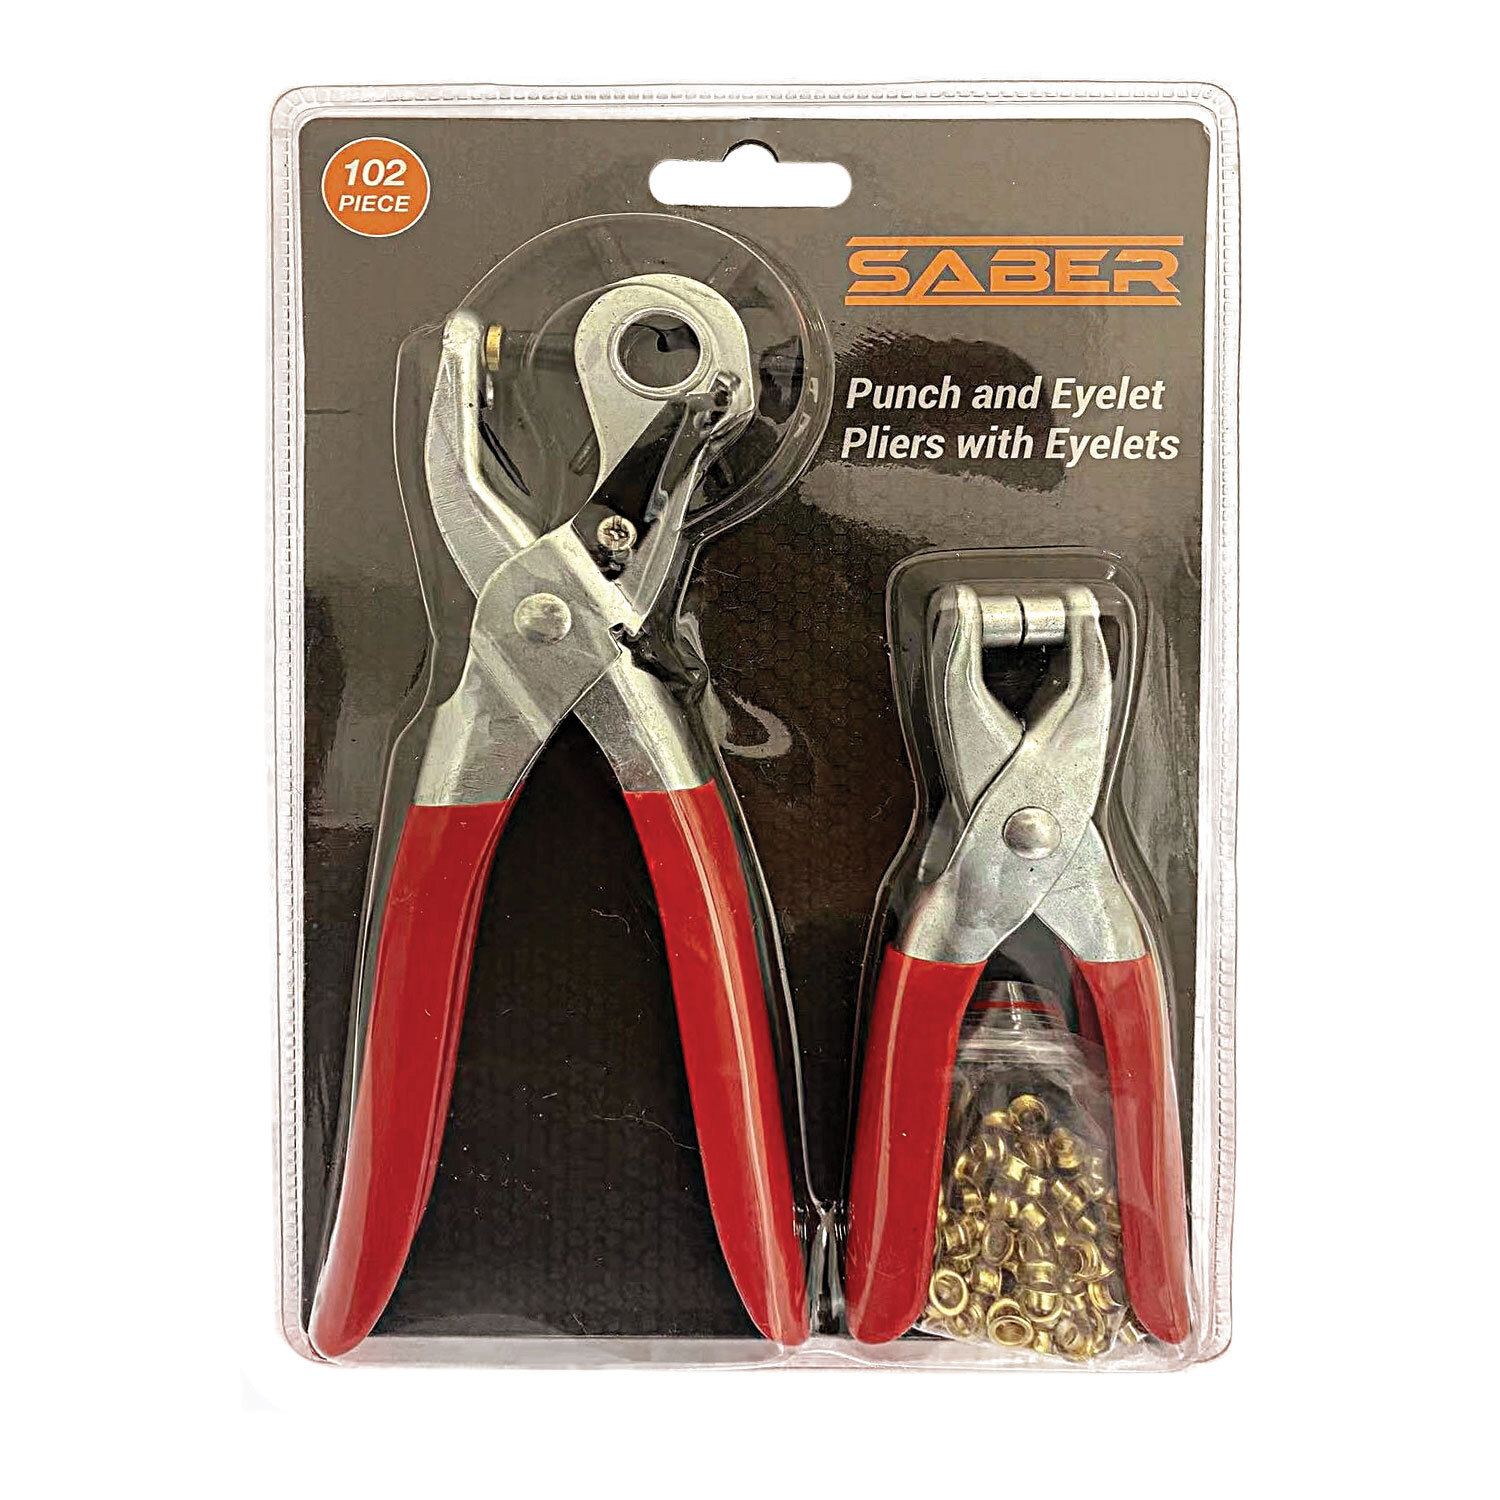 Saber Punch and Eyelet Pliers Set Image